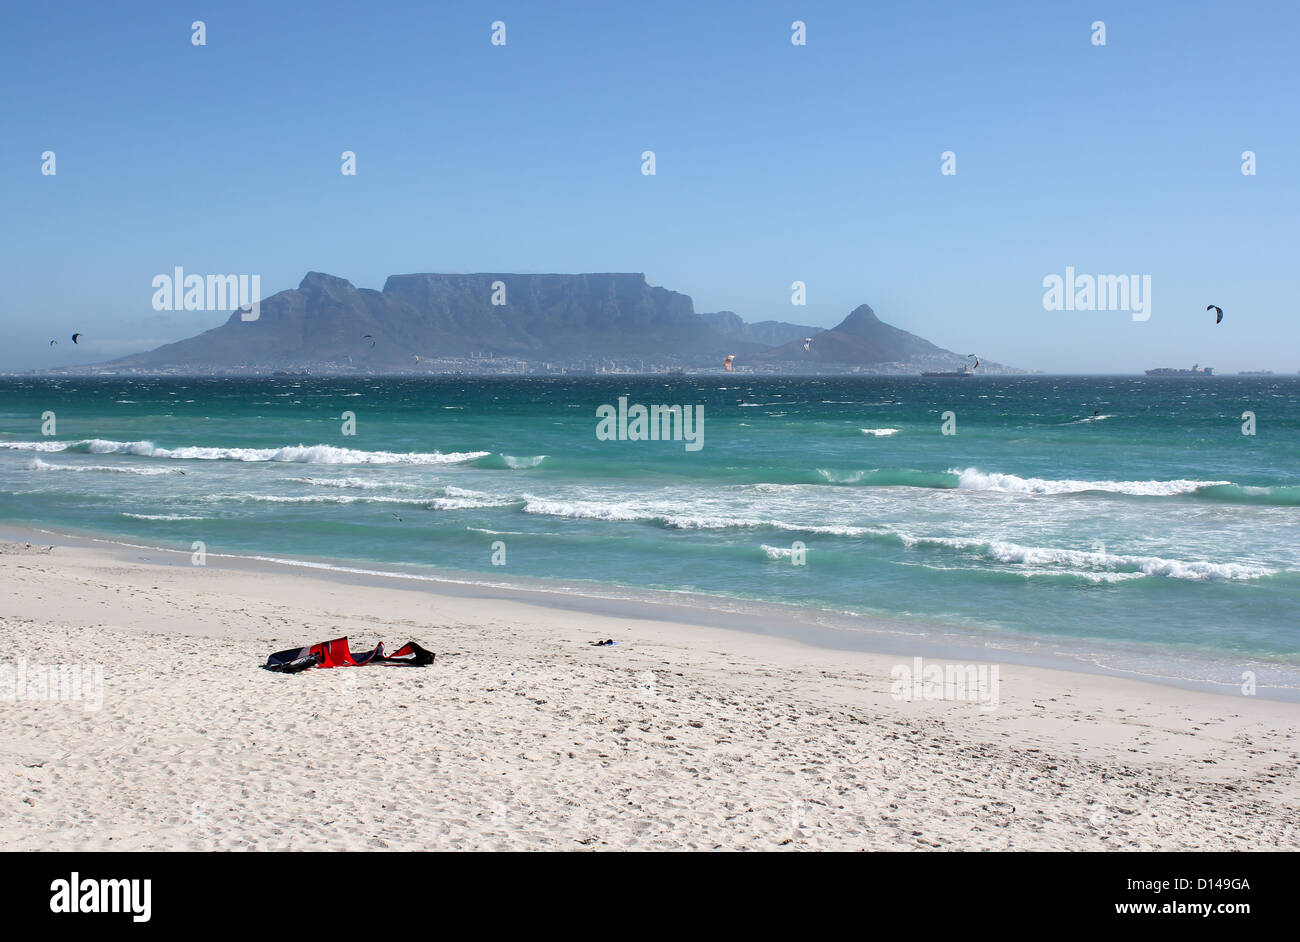 Kiteboarders at Milnerton Beach in Cape Town, South Africa Stock Photo